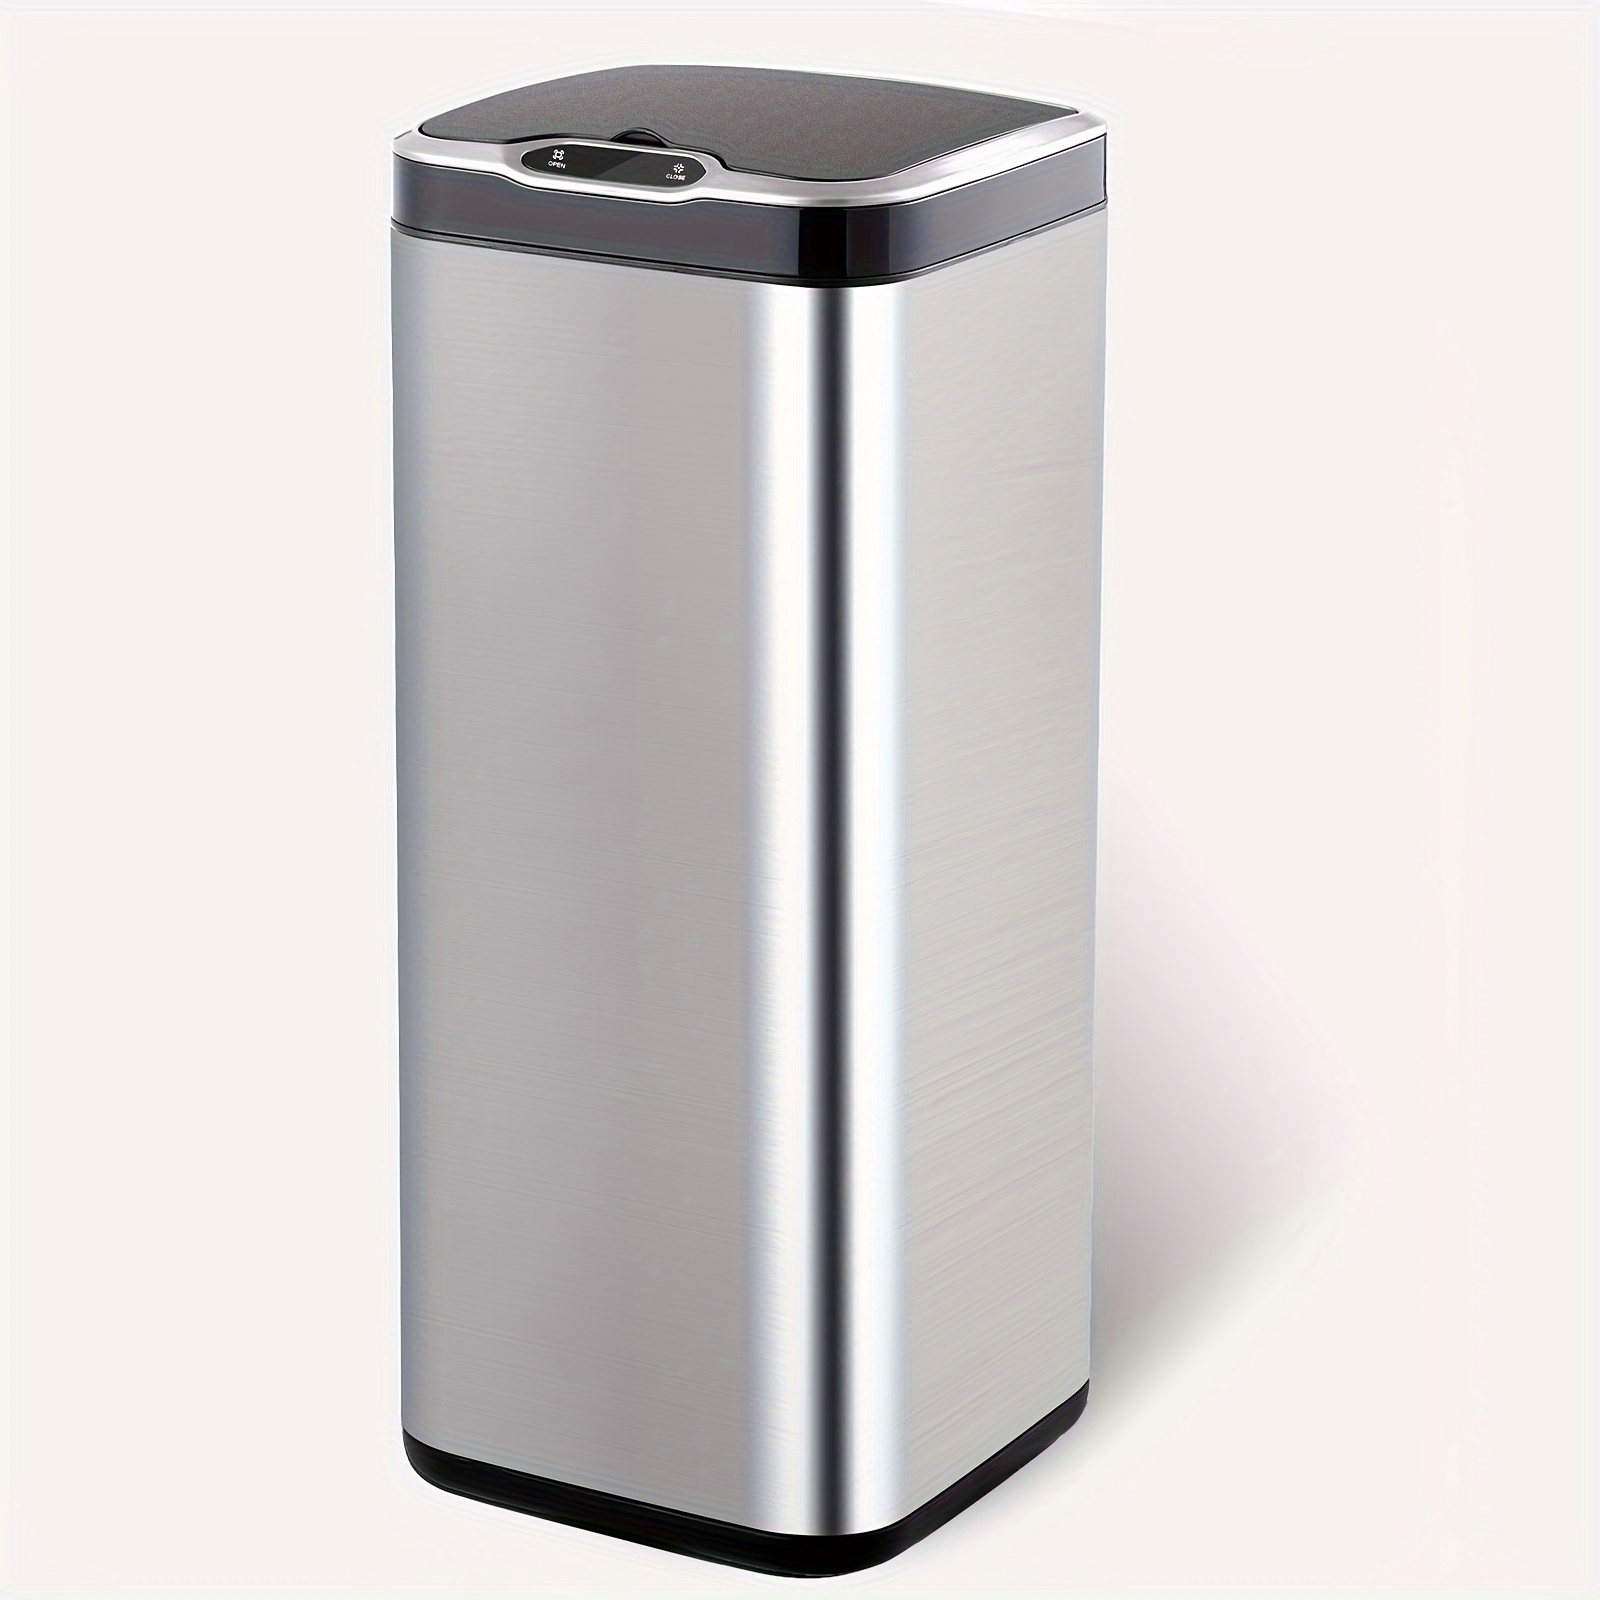 

Elpheco Square Stainless Steel 8 Gallon Sensor Trash Can With Lid, 30 Liter Automatic Kitchen Garbage Can, Slim Metal Trash Can For Home, Hotel, Office Building, Public Places